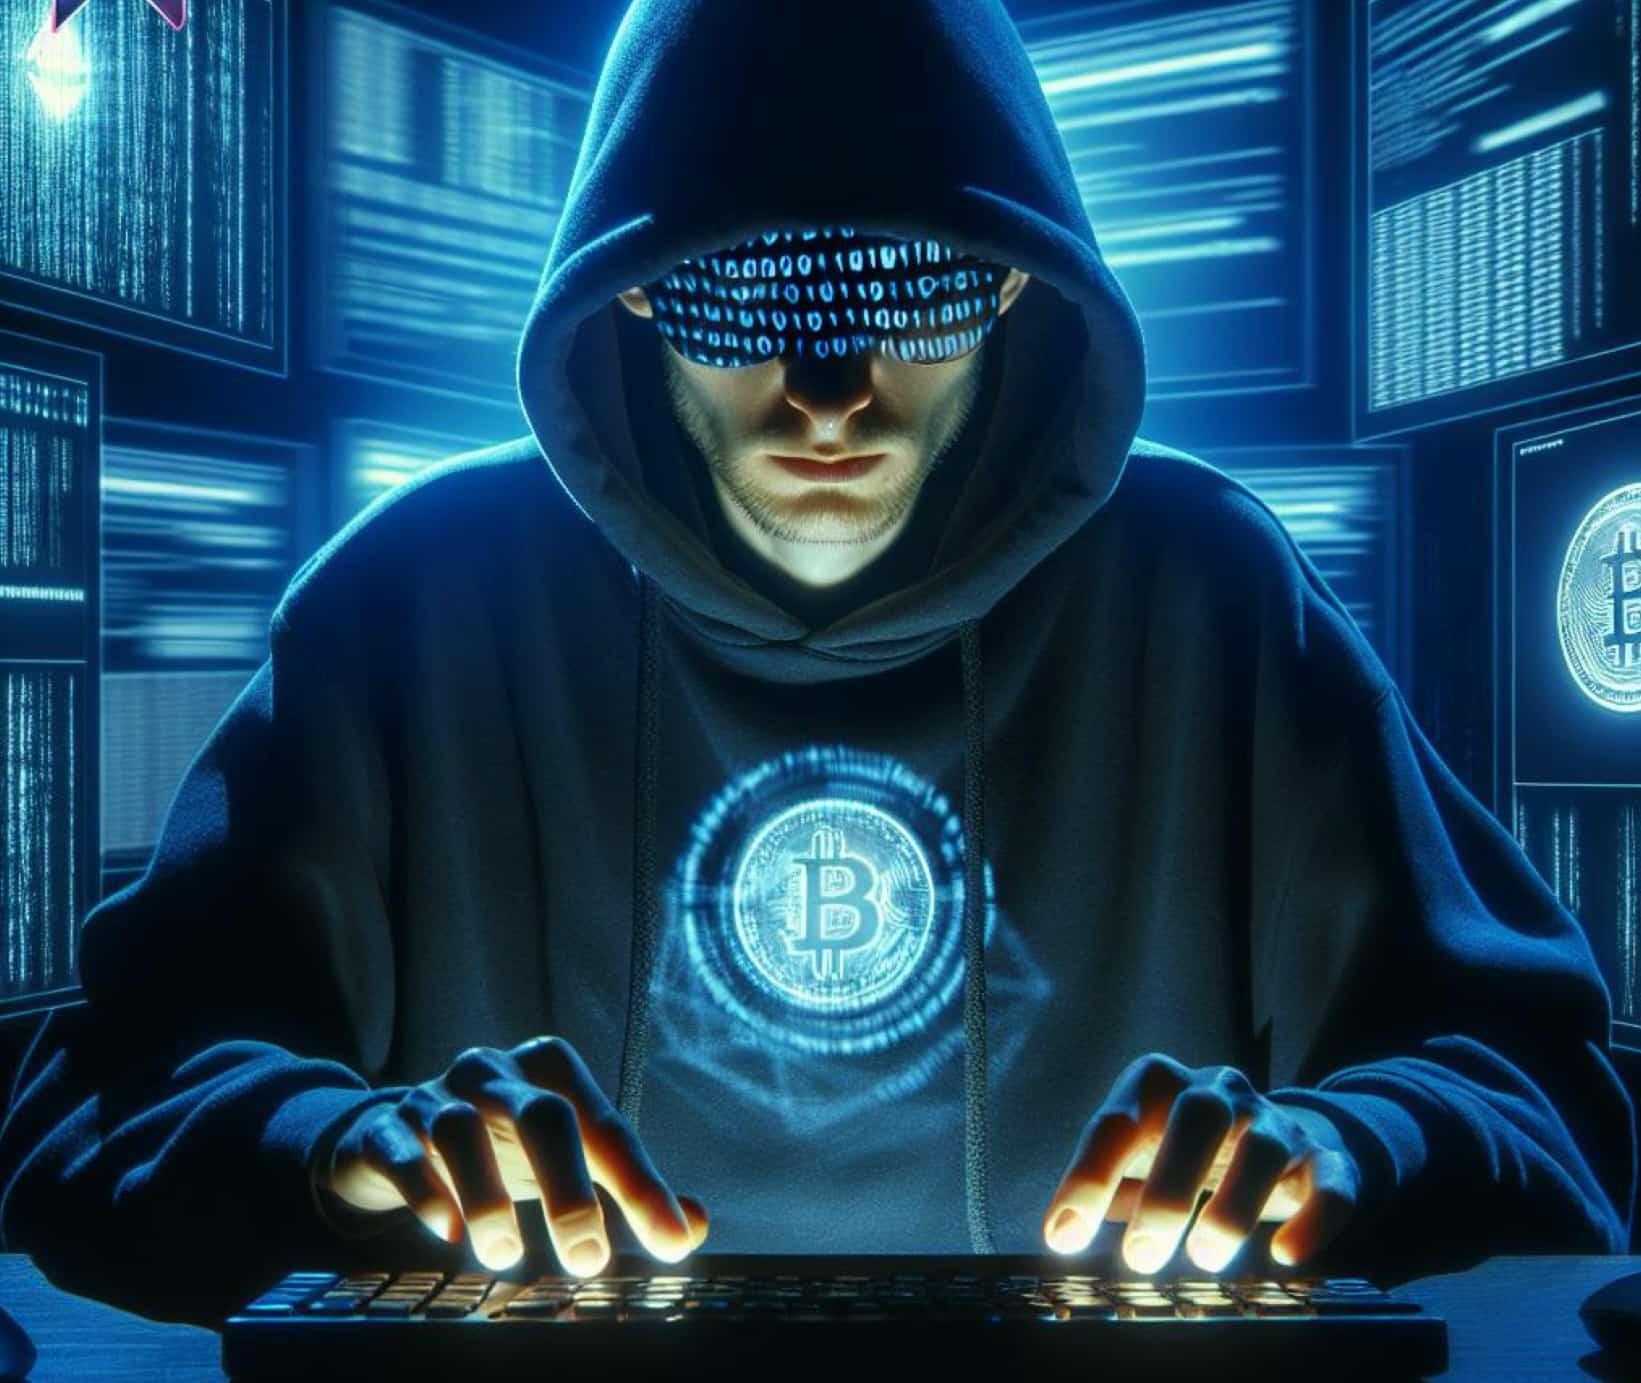 DMM Bitcoin exchange based in Japan has opened an investigation into the hack while promising that its customers will be fully reimbursed.